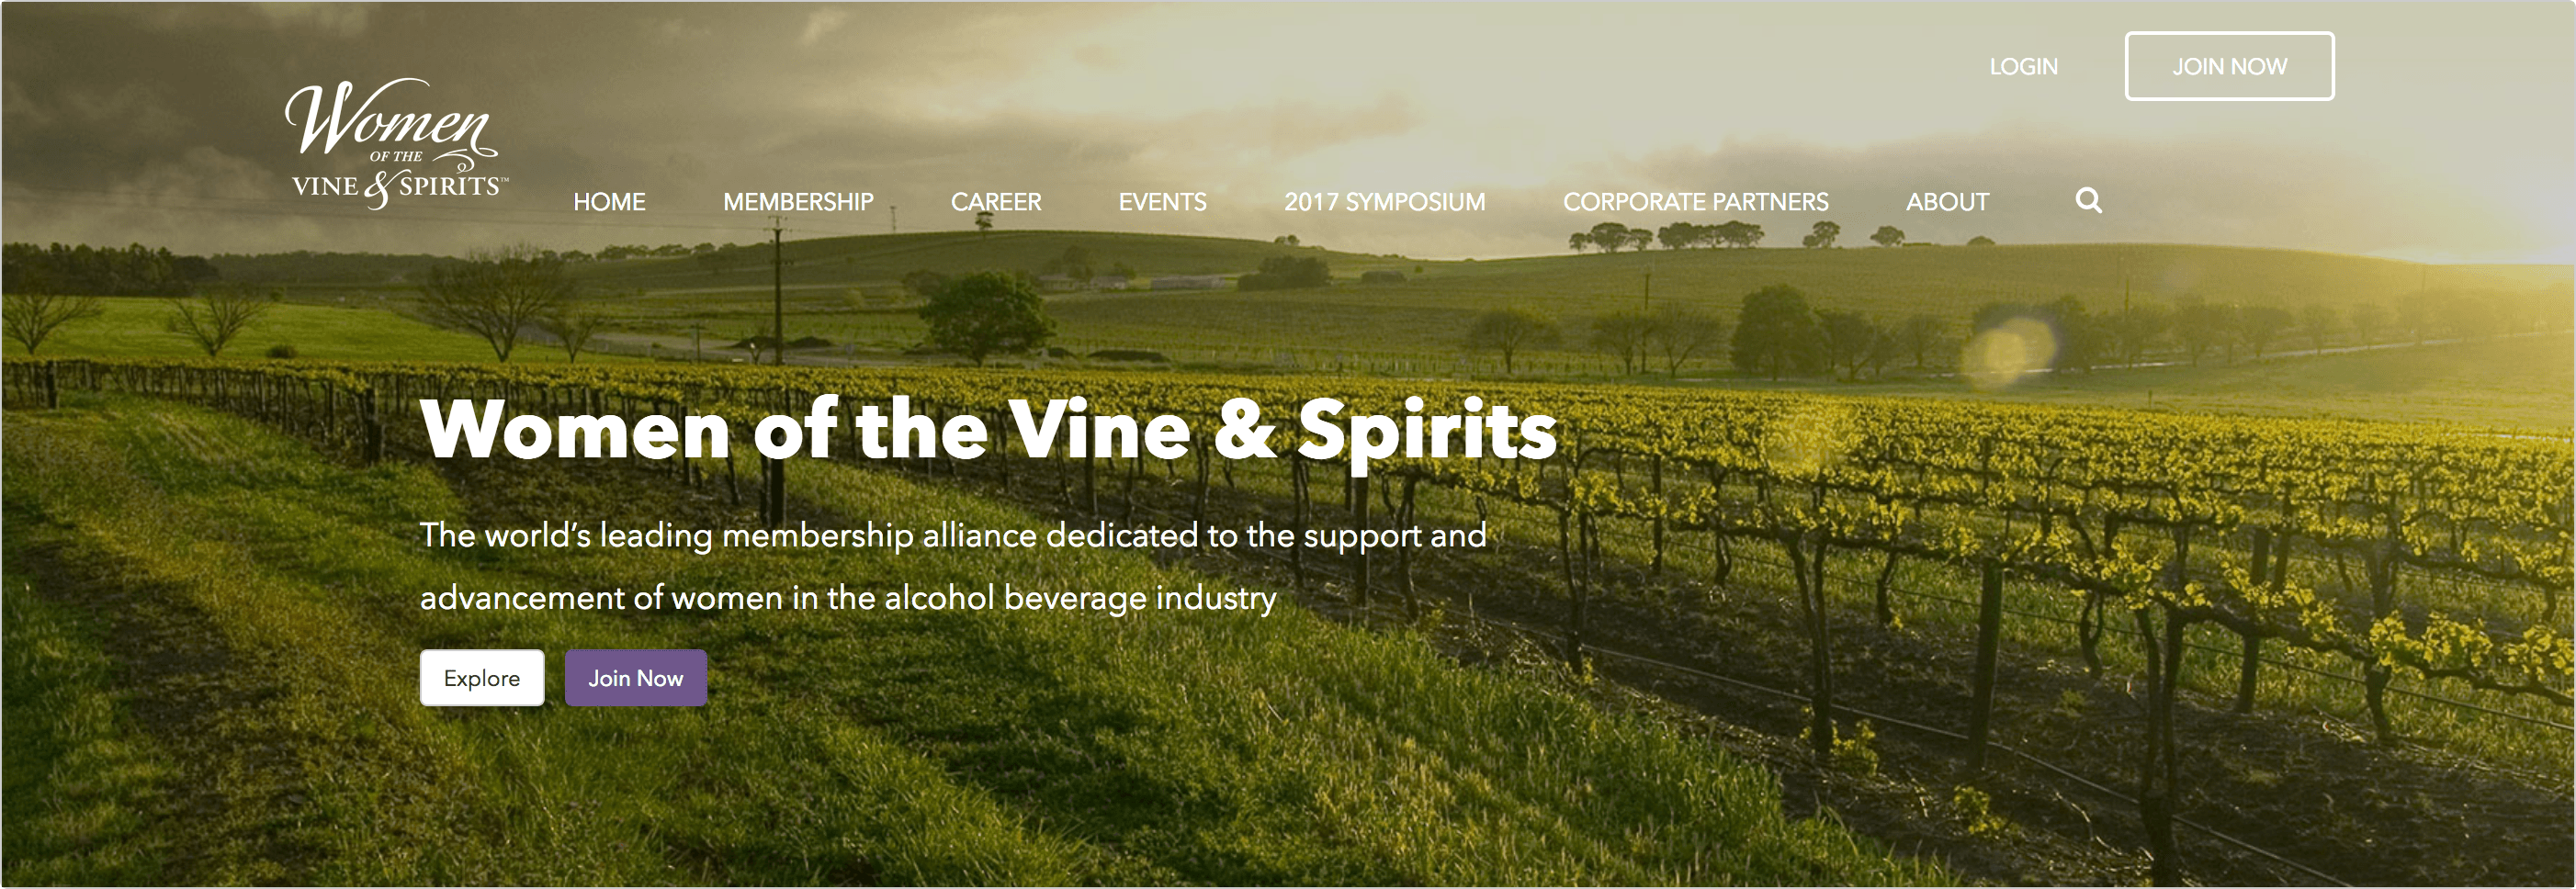 Women of the Vine and Spirits